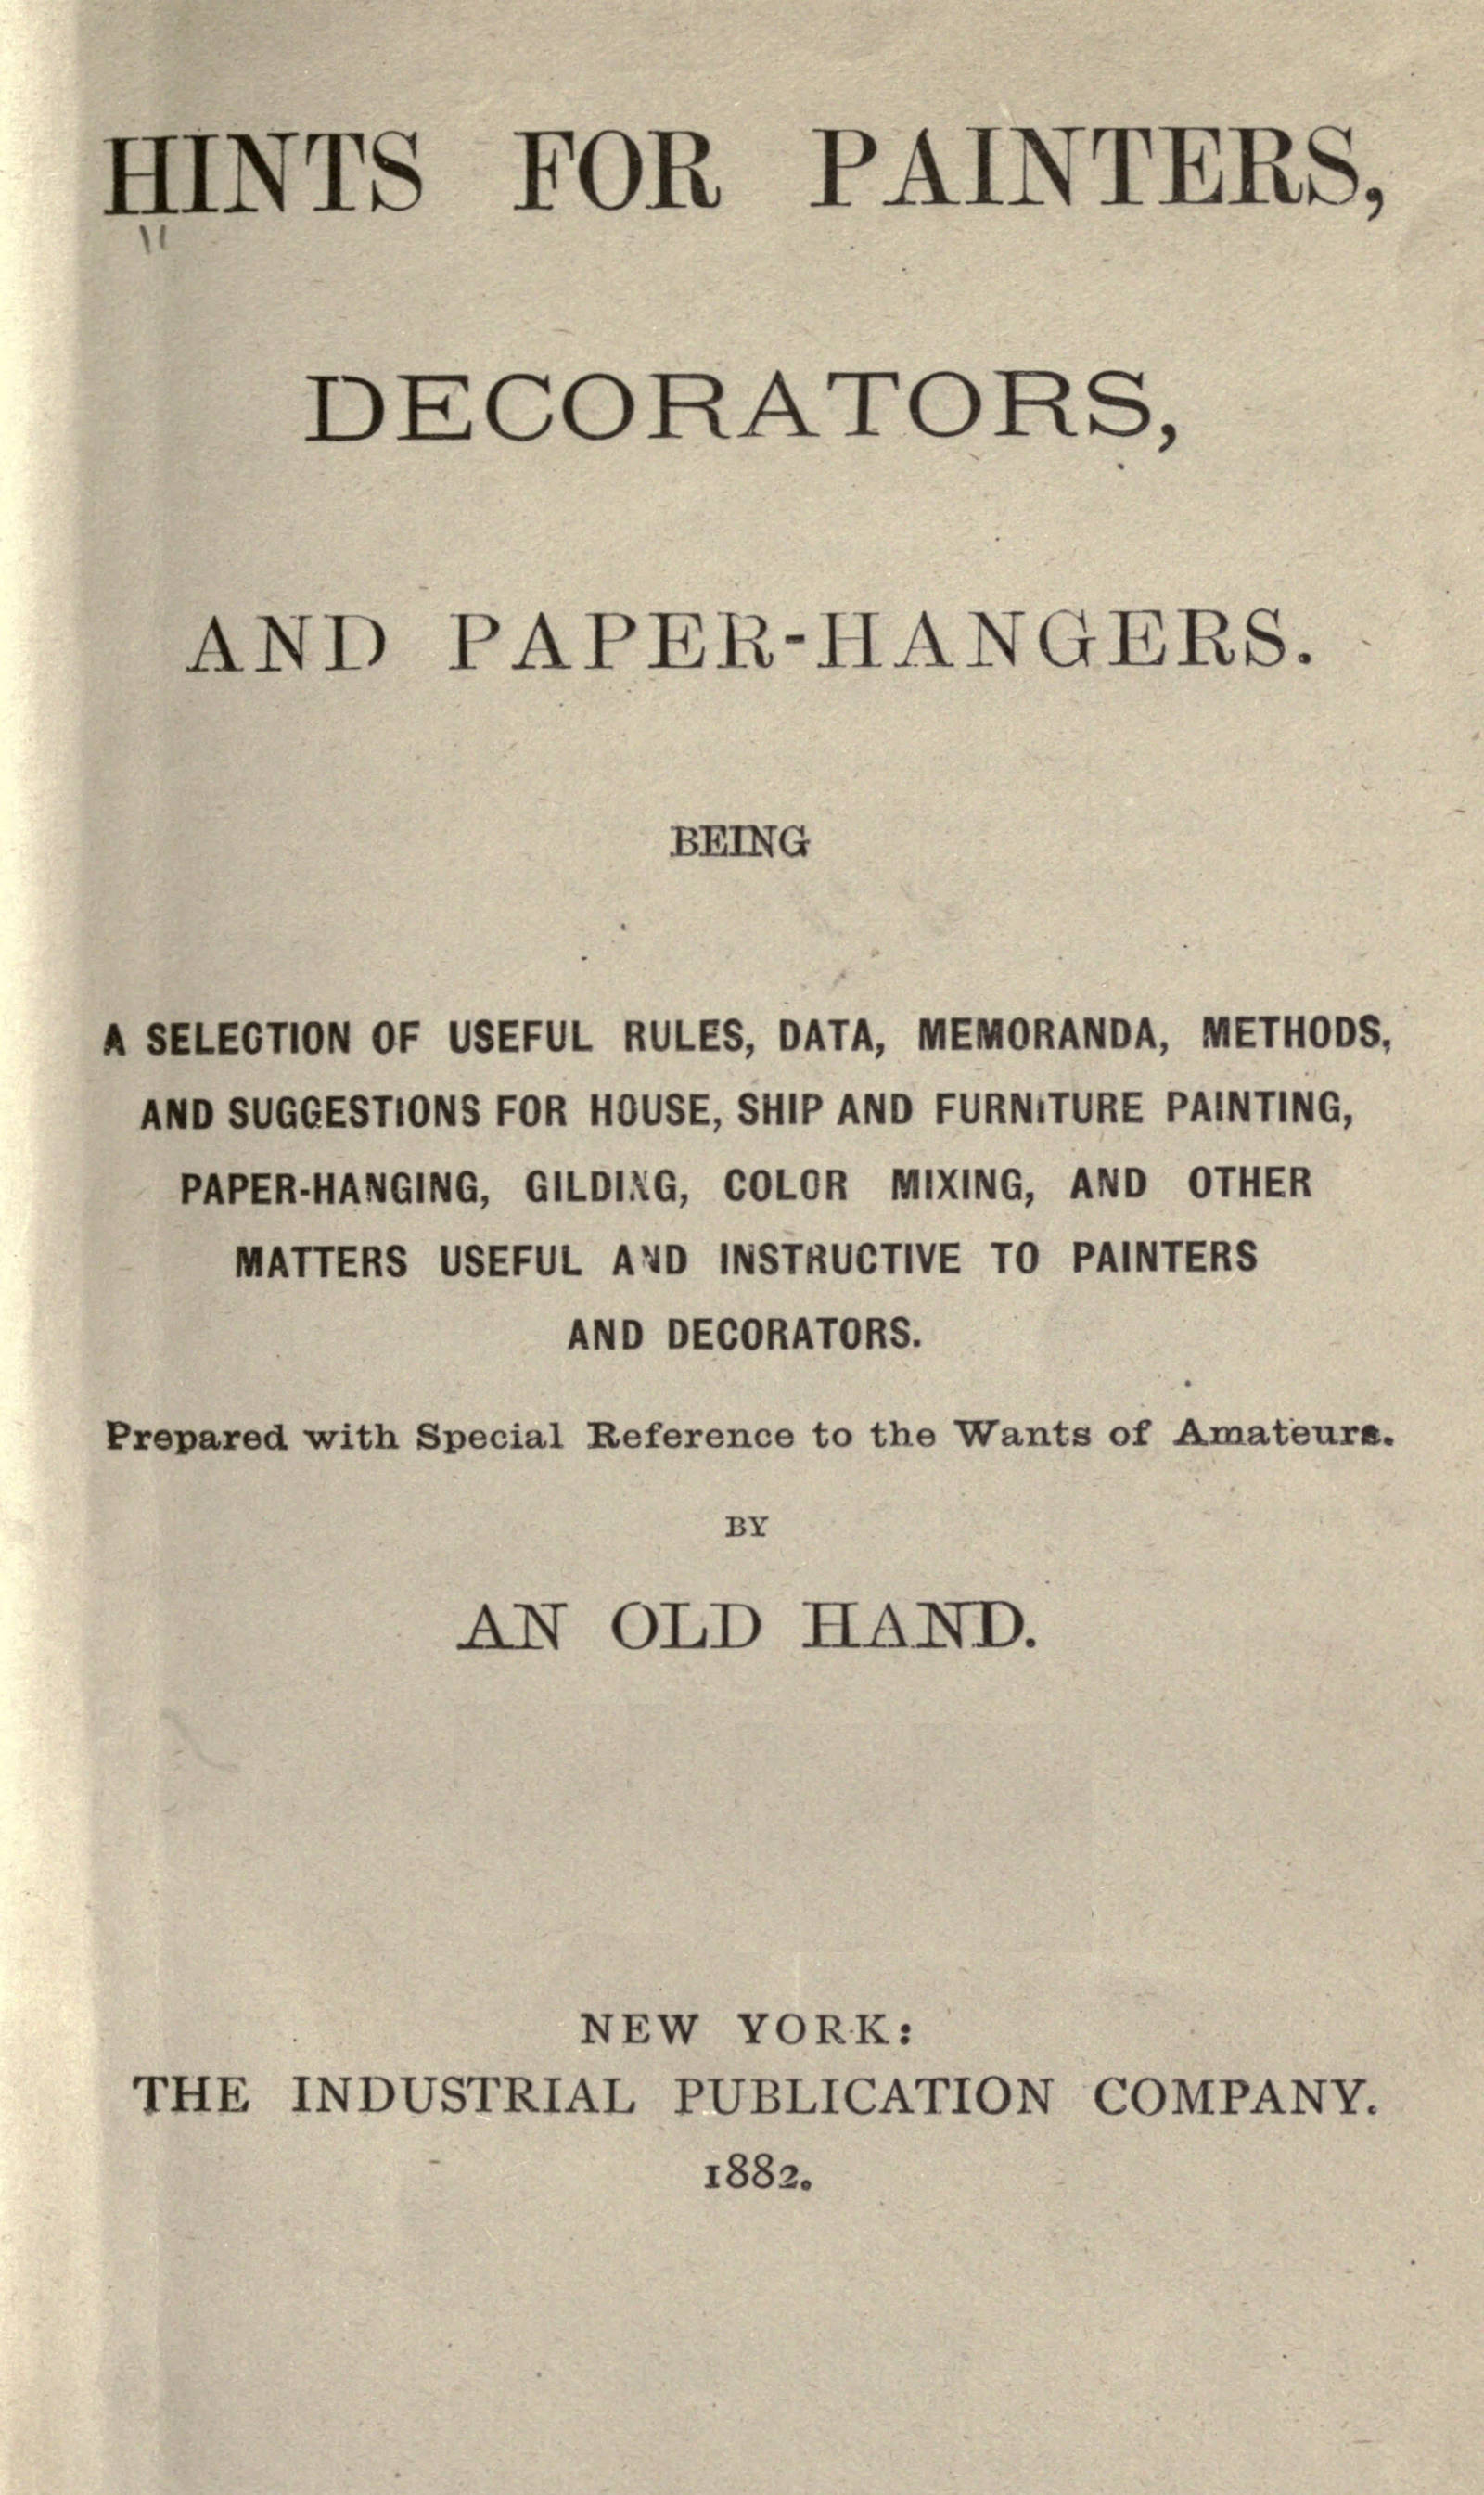 Hints for painters, decorators, and paper-hangers.&#10;Being a selection of useful rules, data, memoranda, methods, and suggestions for house, ship and furniture painting, paper-hanging, gilding, color mixing, and other matters useful and instructive to painters and decorators. Prepared with special reference to the wants of amateurs